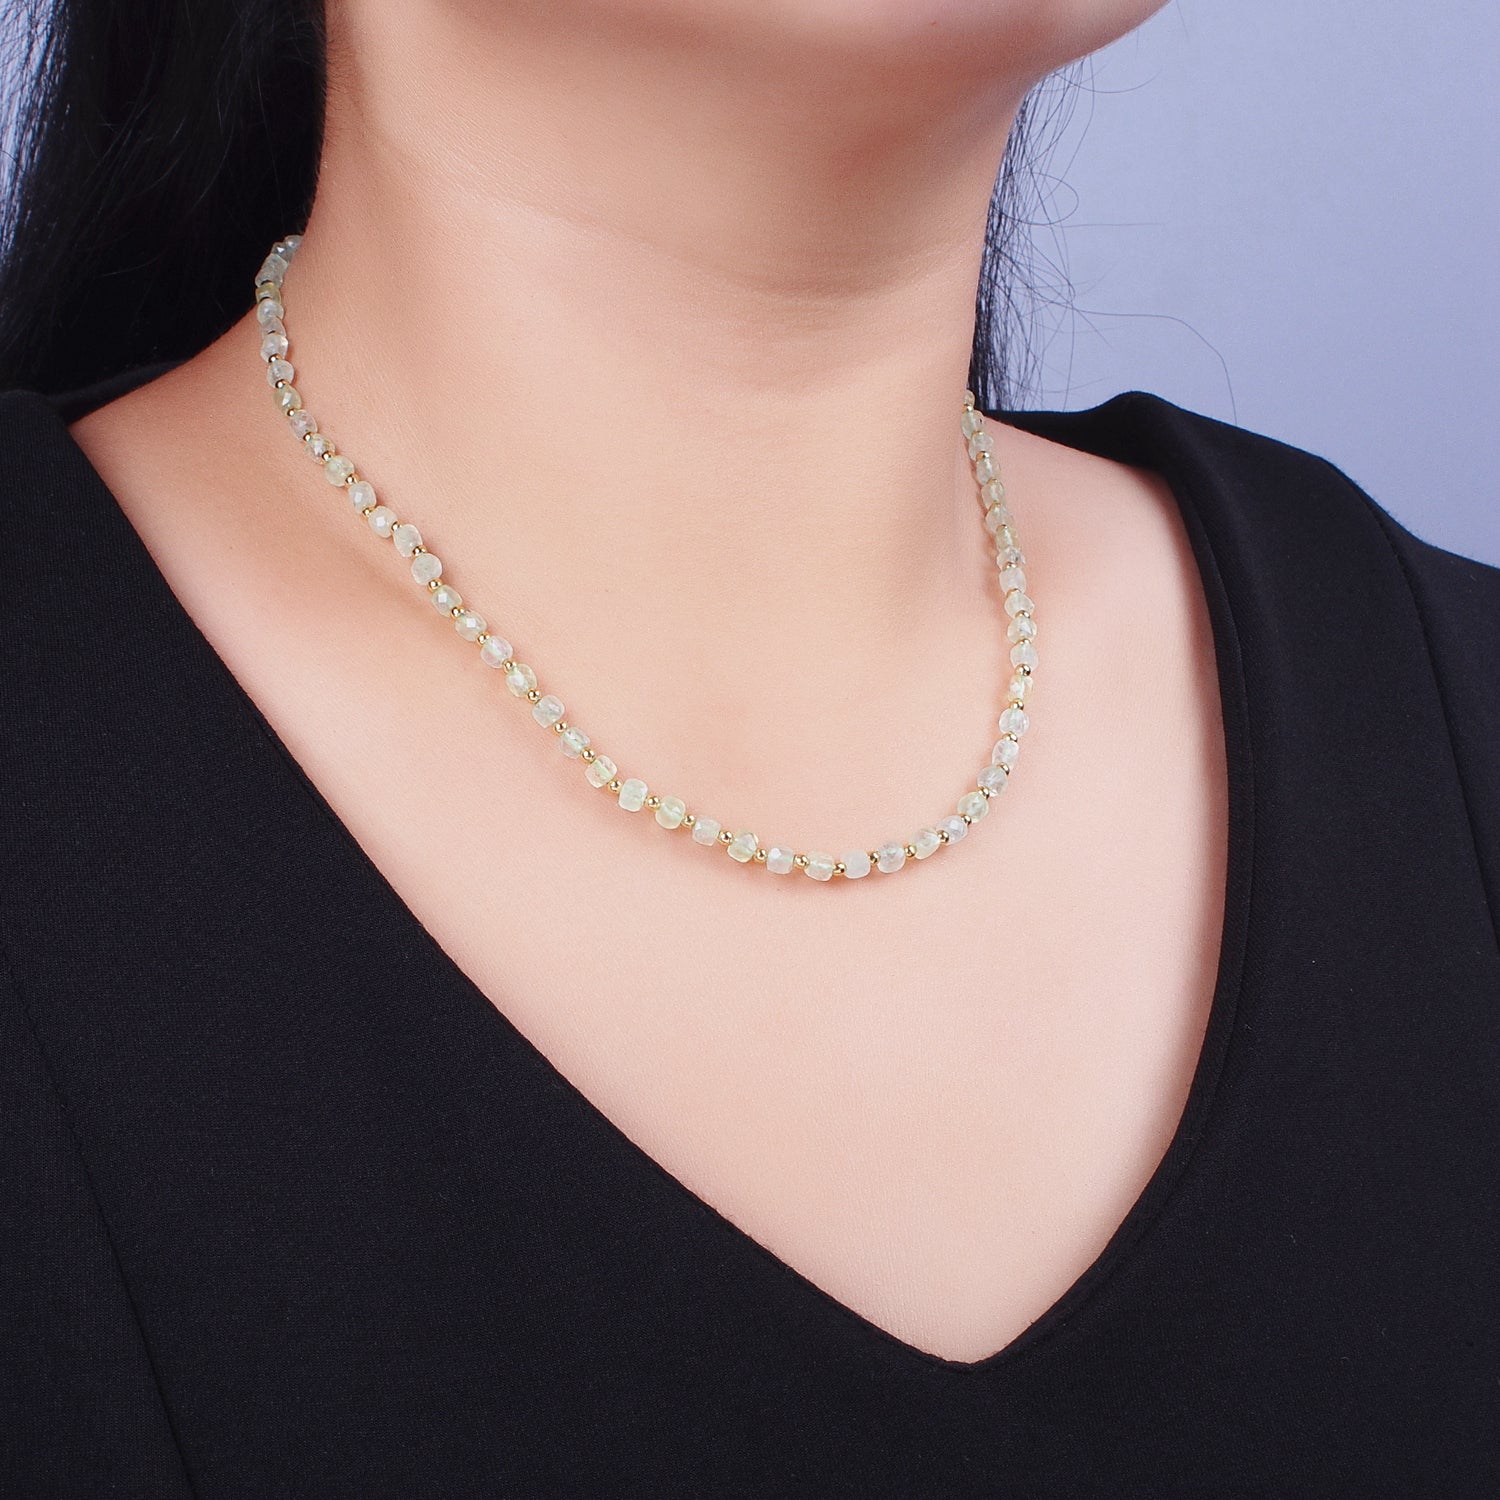 16 Inch Natural Prasiolite Green Multifaceted Cube Gemstone w. Gold Bead Choker Necklace | WA-1446 - DLUXCA